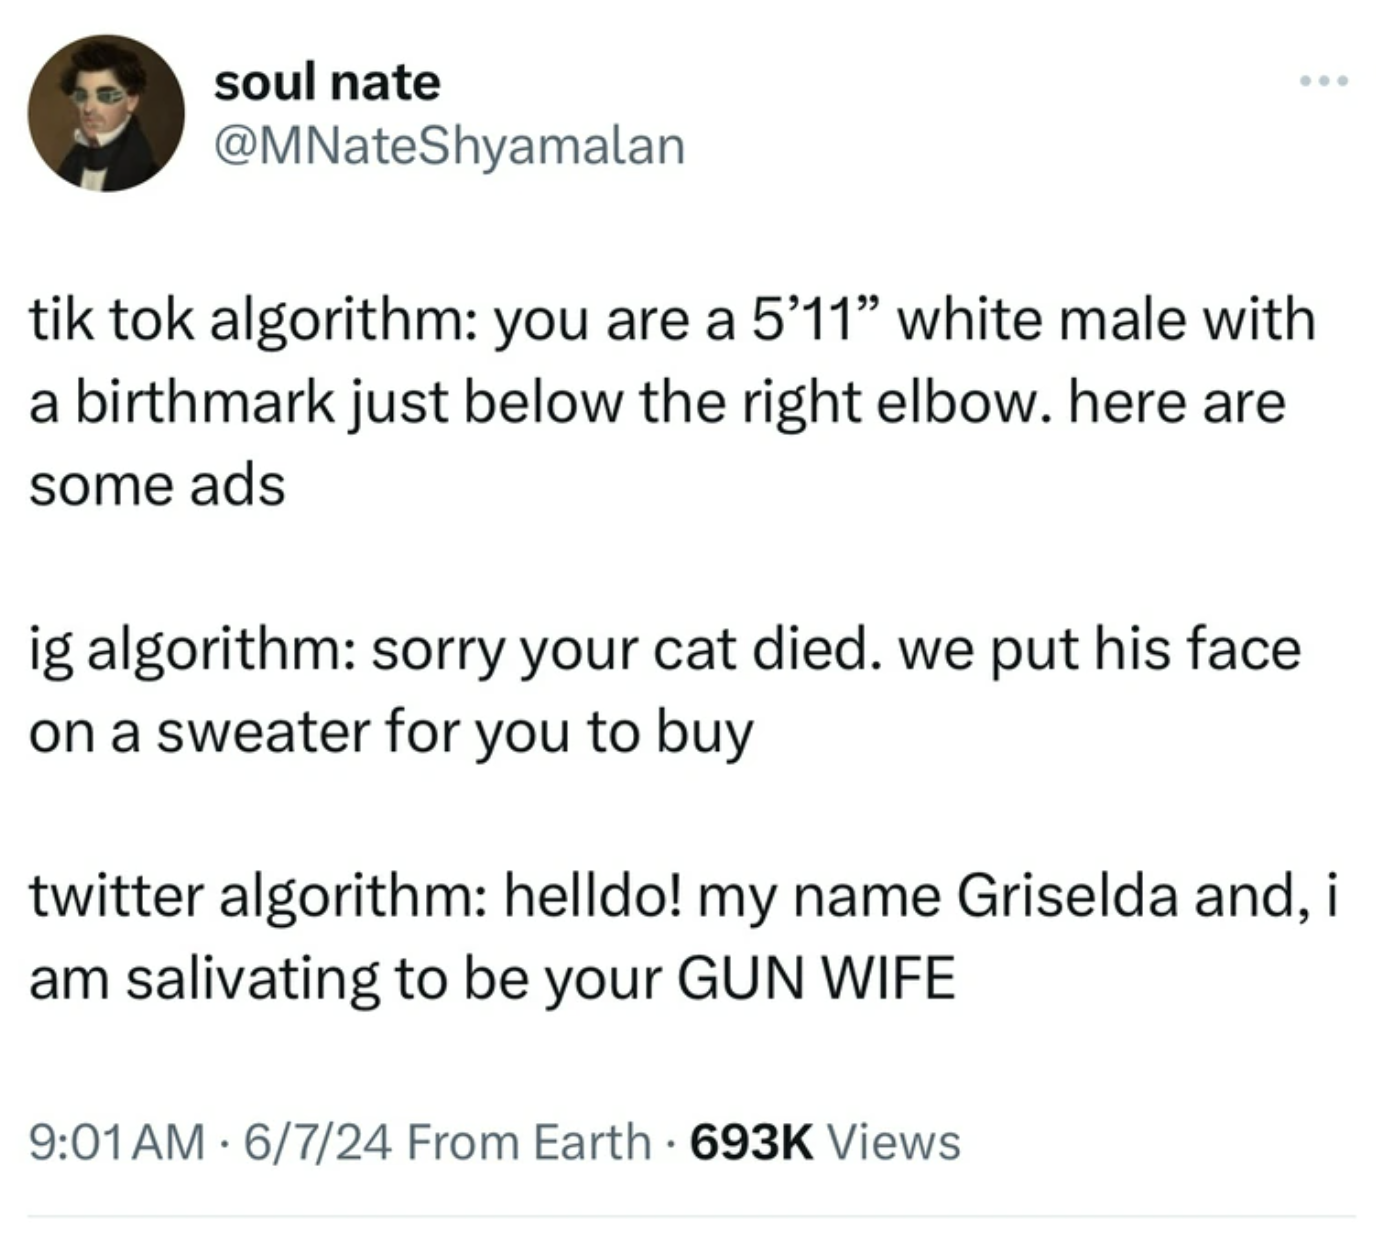 screenshot - soul nate tik tok algorithm you are a 5'11" white male with a birthmark just below the right elbow. here are some ads ig algorithm sorry your cat died. we put his face on a sweater for you to buy twitter algorithm helldo! my name Griselda and